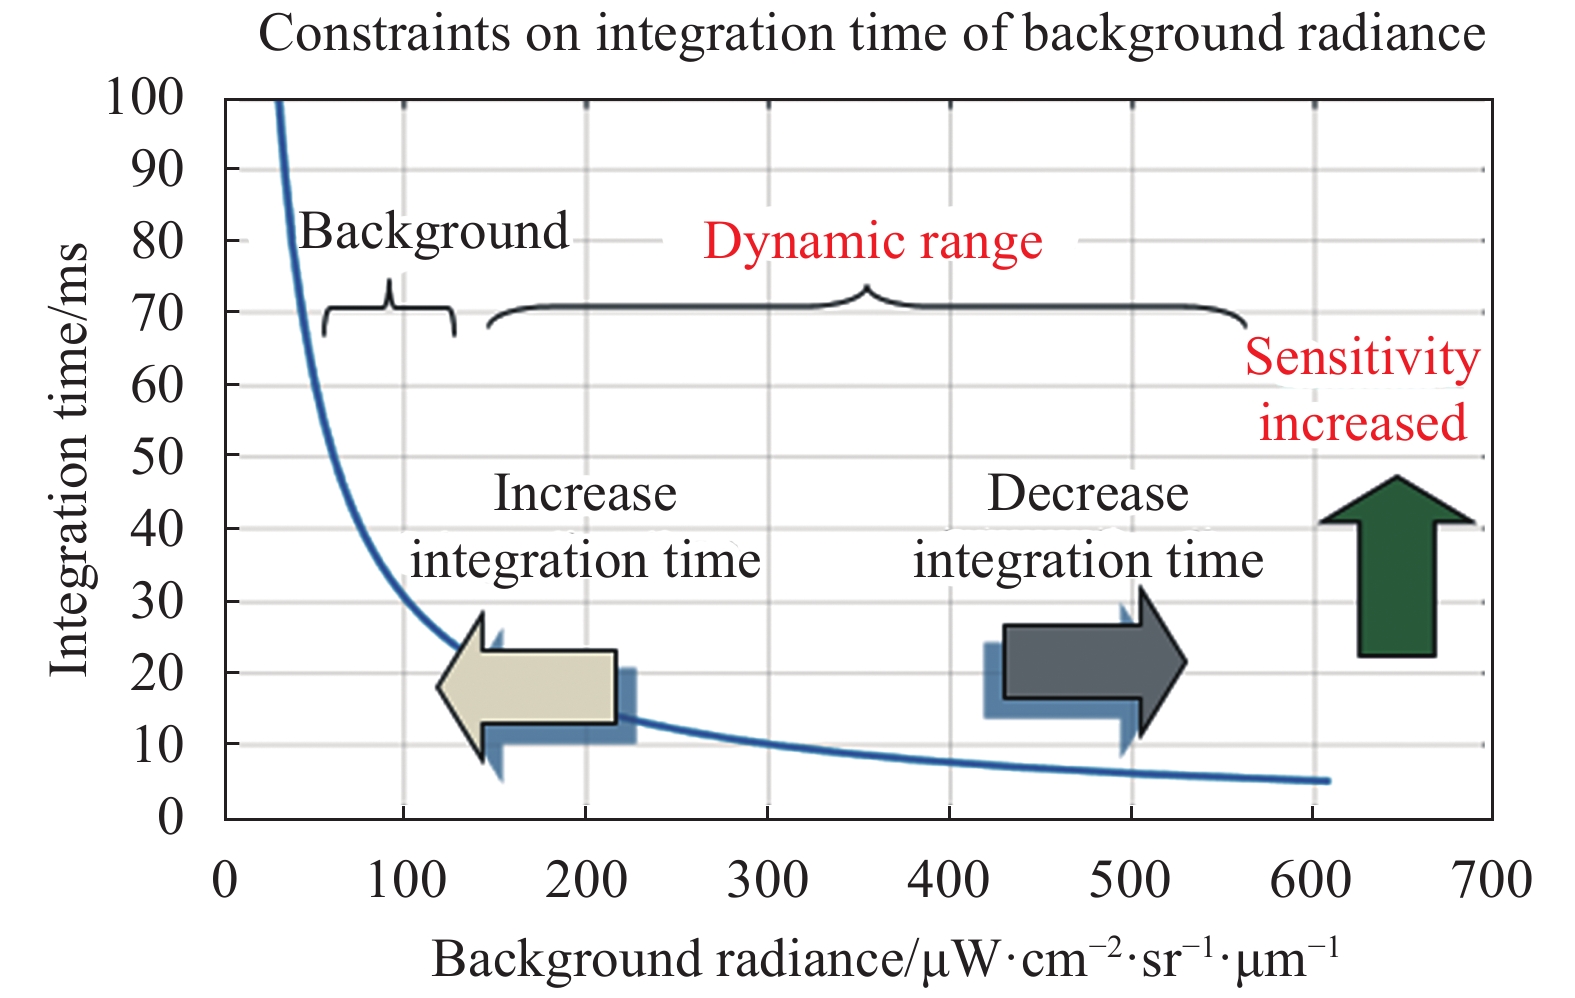 Constraints of background and integration time